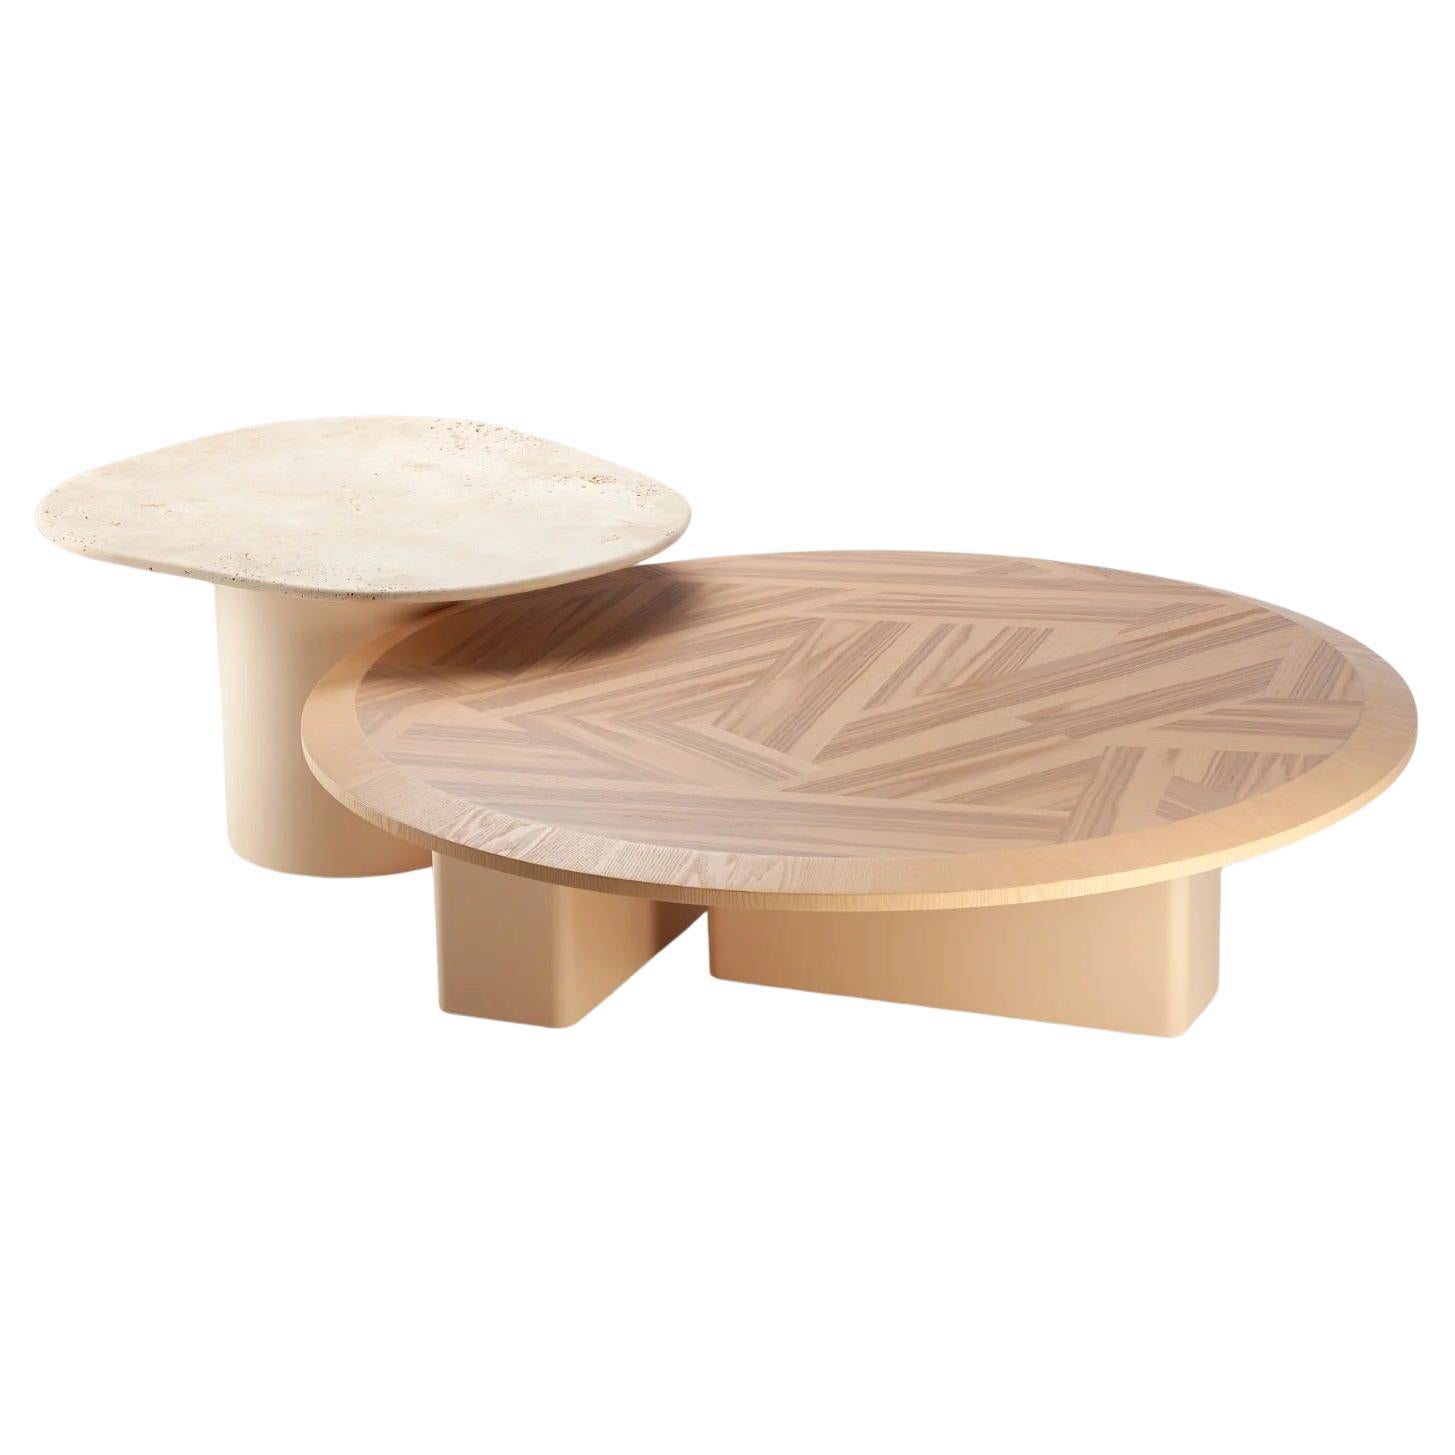 DOOQ Scandinavian Modern Travertine and Olive Ash Wood Tables L'anamour, Rose For Sale